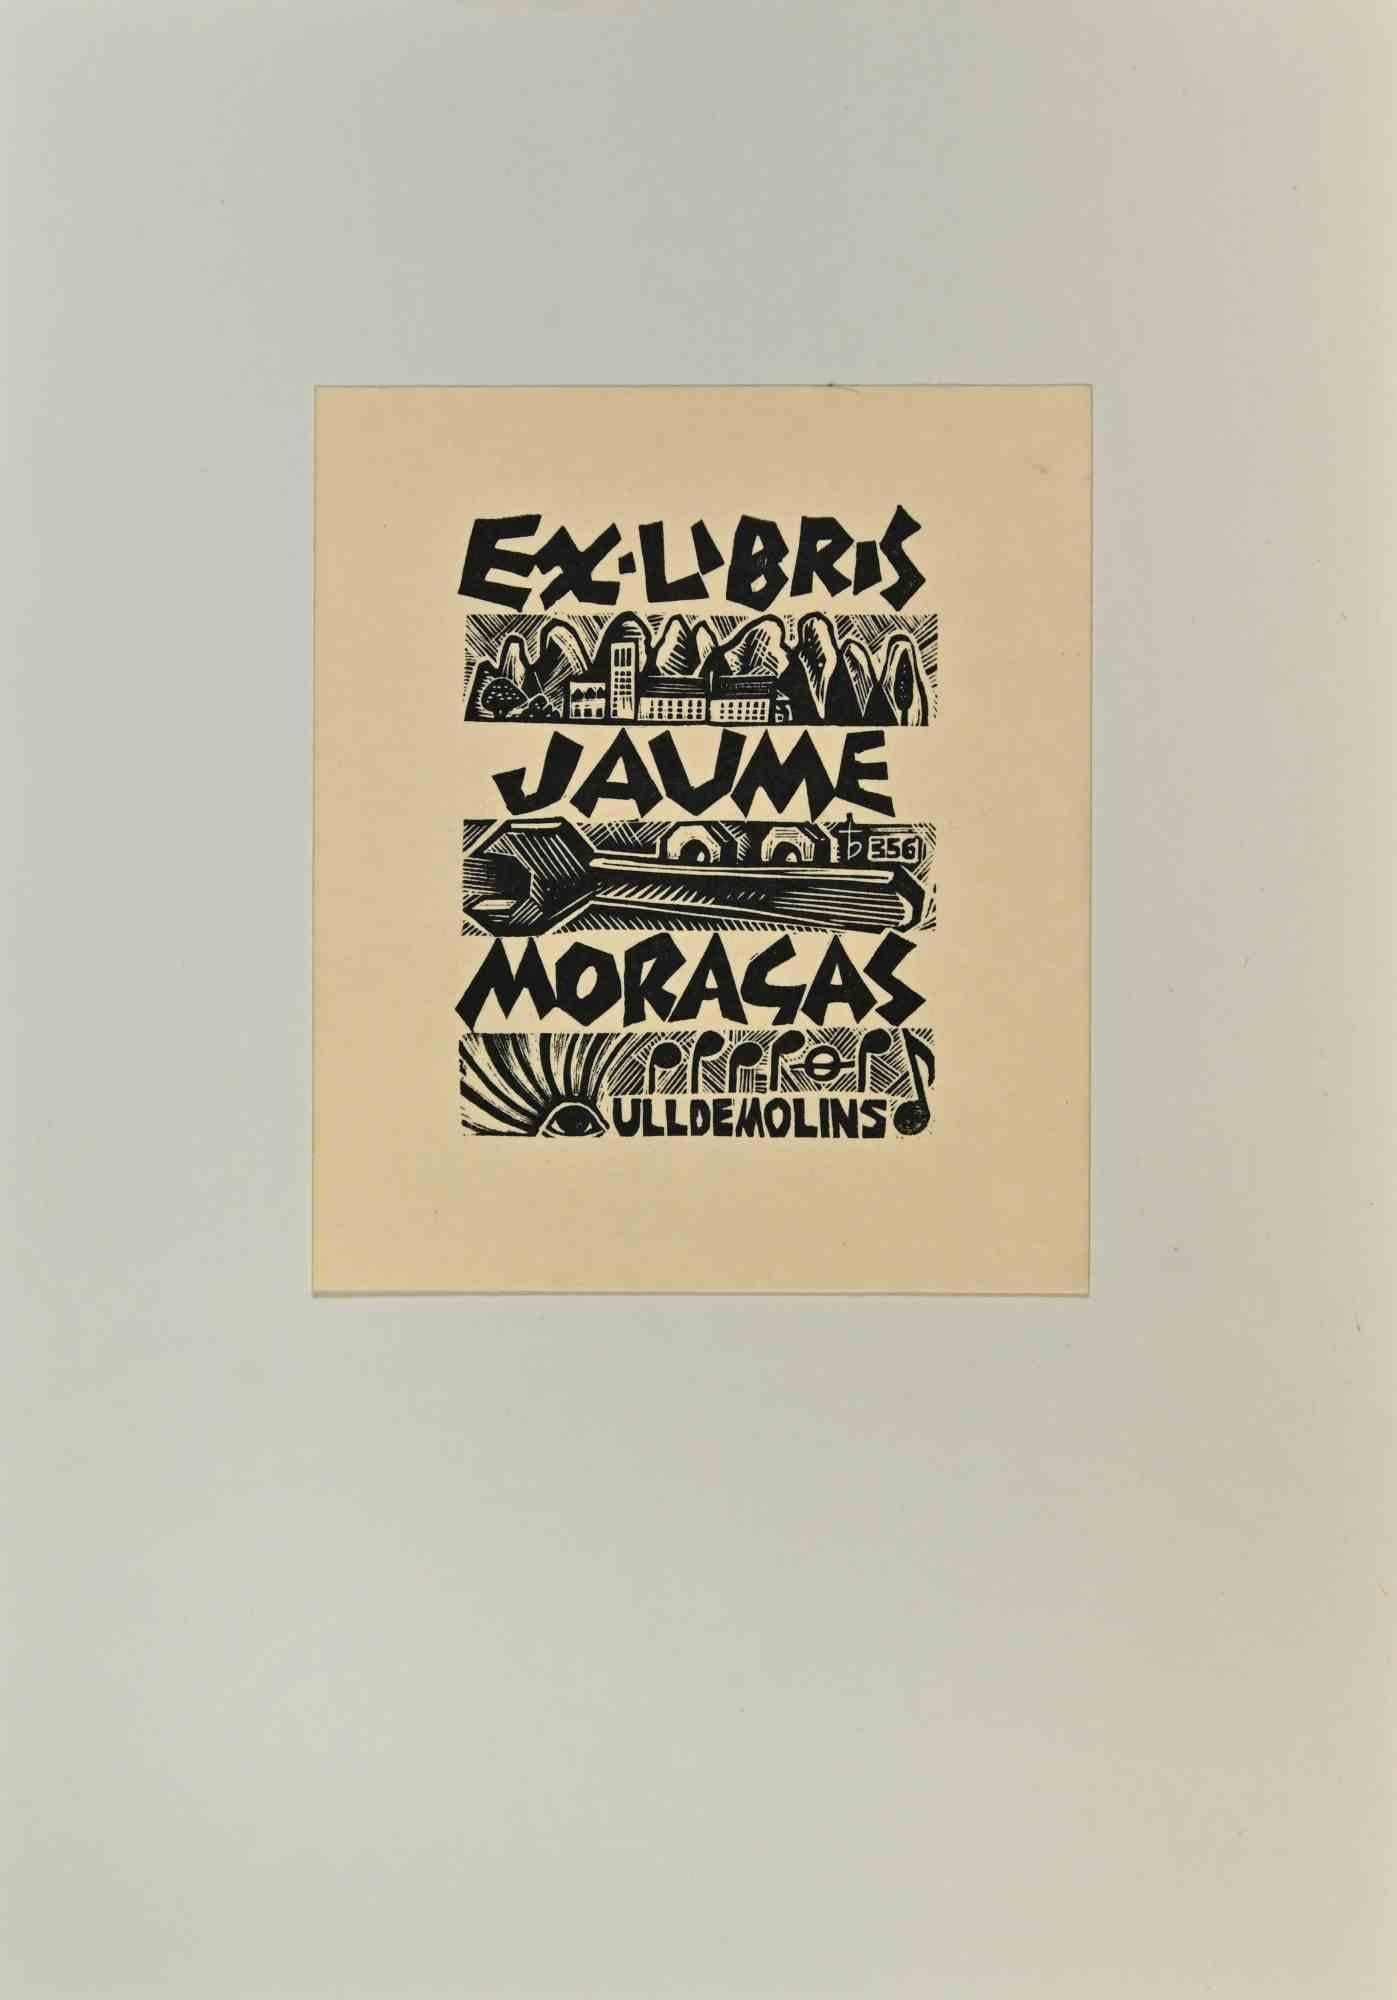  Ex-Libris - Jaume Moragas is an Artwork realized in 1971 by Oriol  M. Divi.

Woodcut B./W. print on ivory paper. The work is glued on cardboard.

Total dimensions: 21 x 15 cm.

Excellent conditions.

Oriol M. Diví was a monk of Montserrat who was